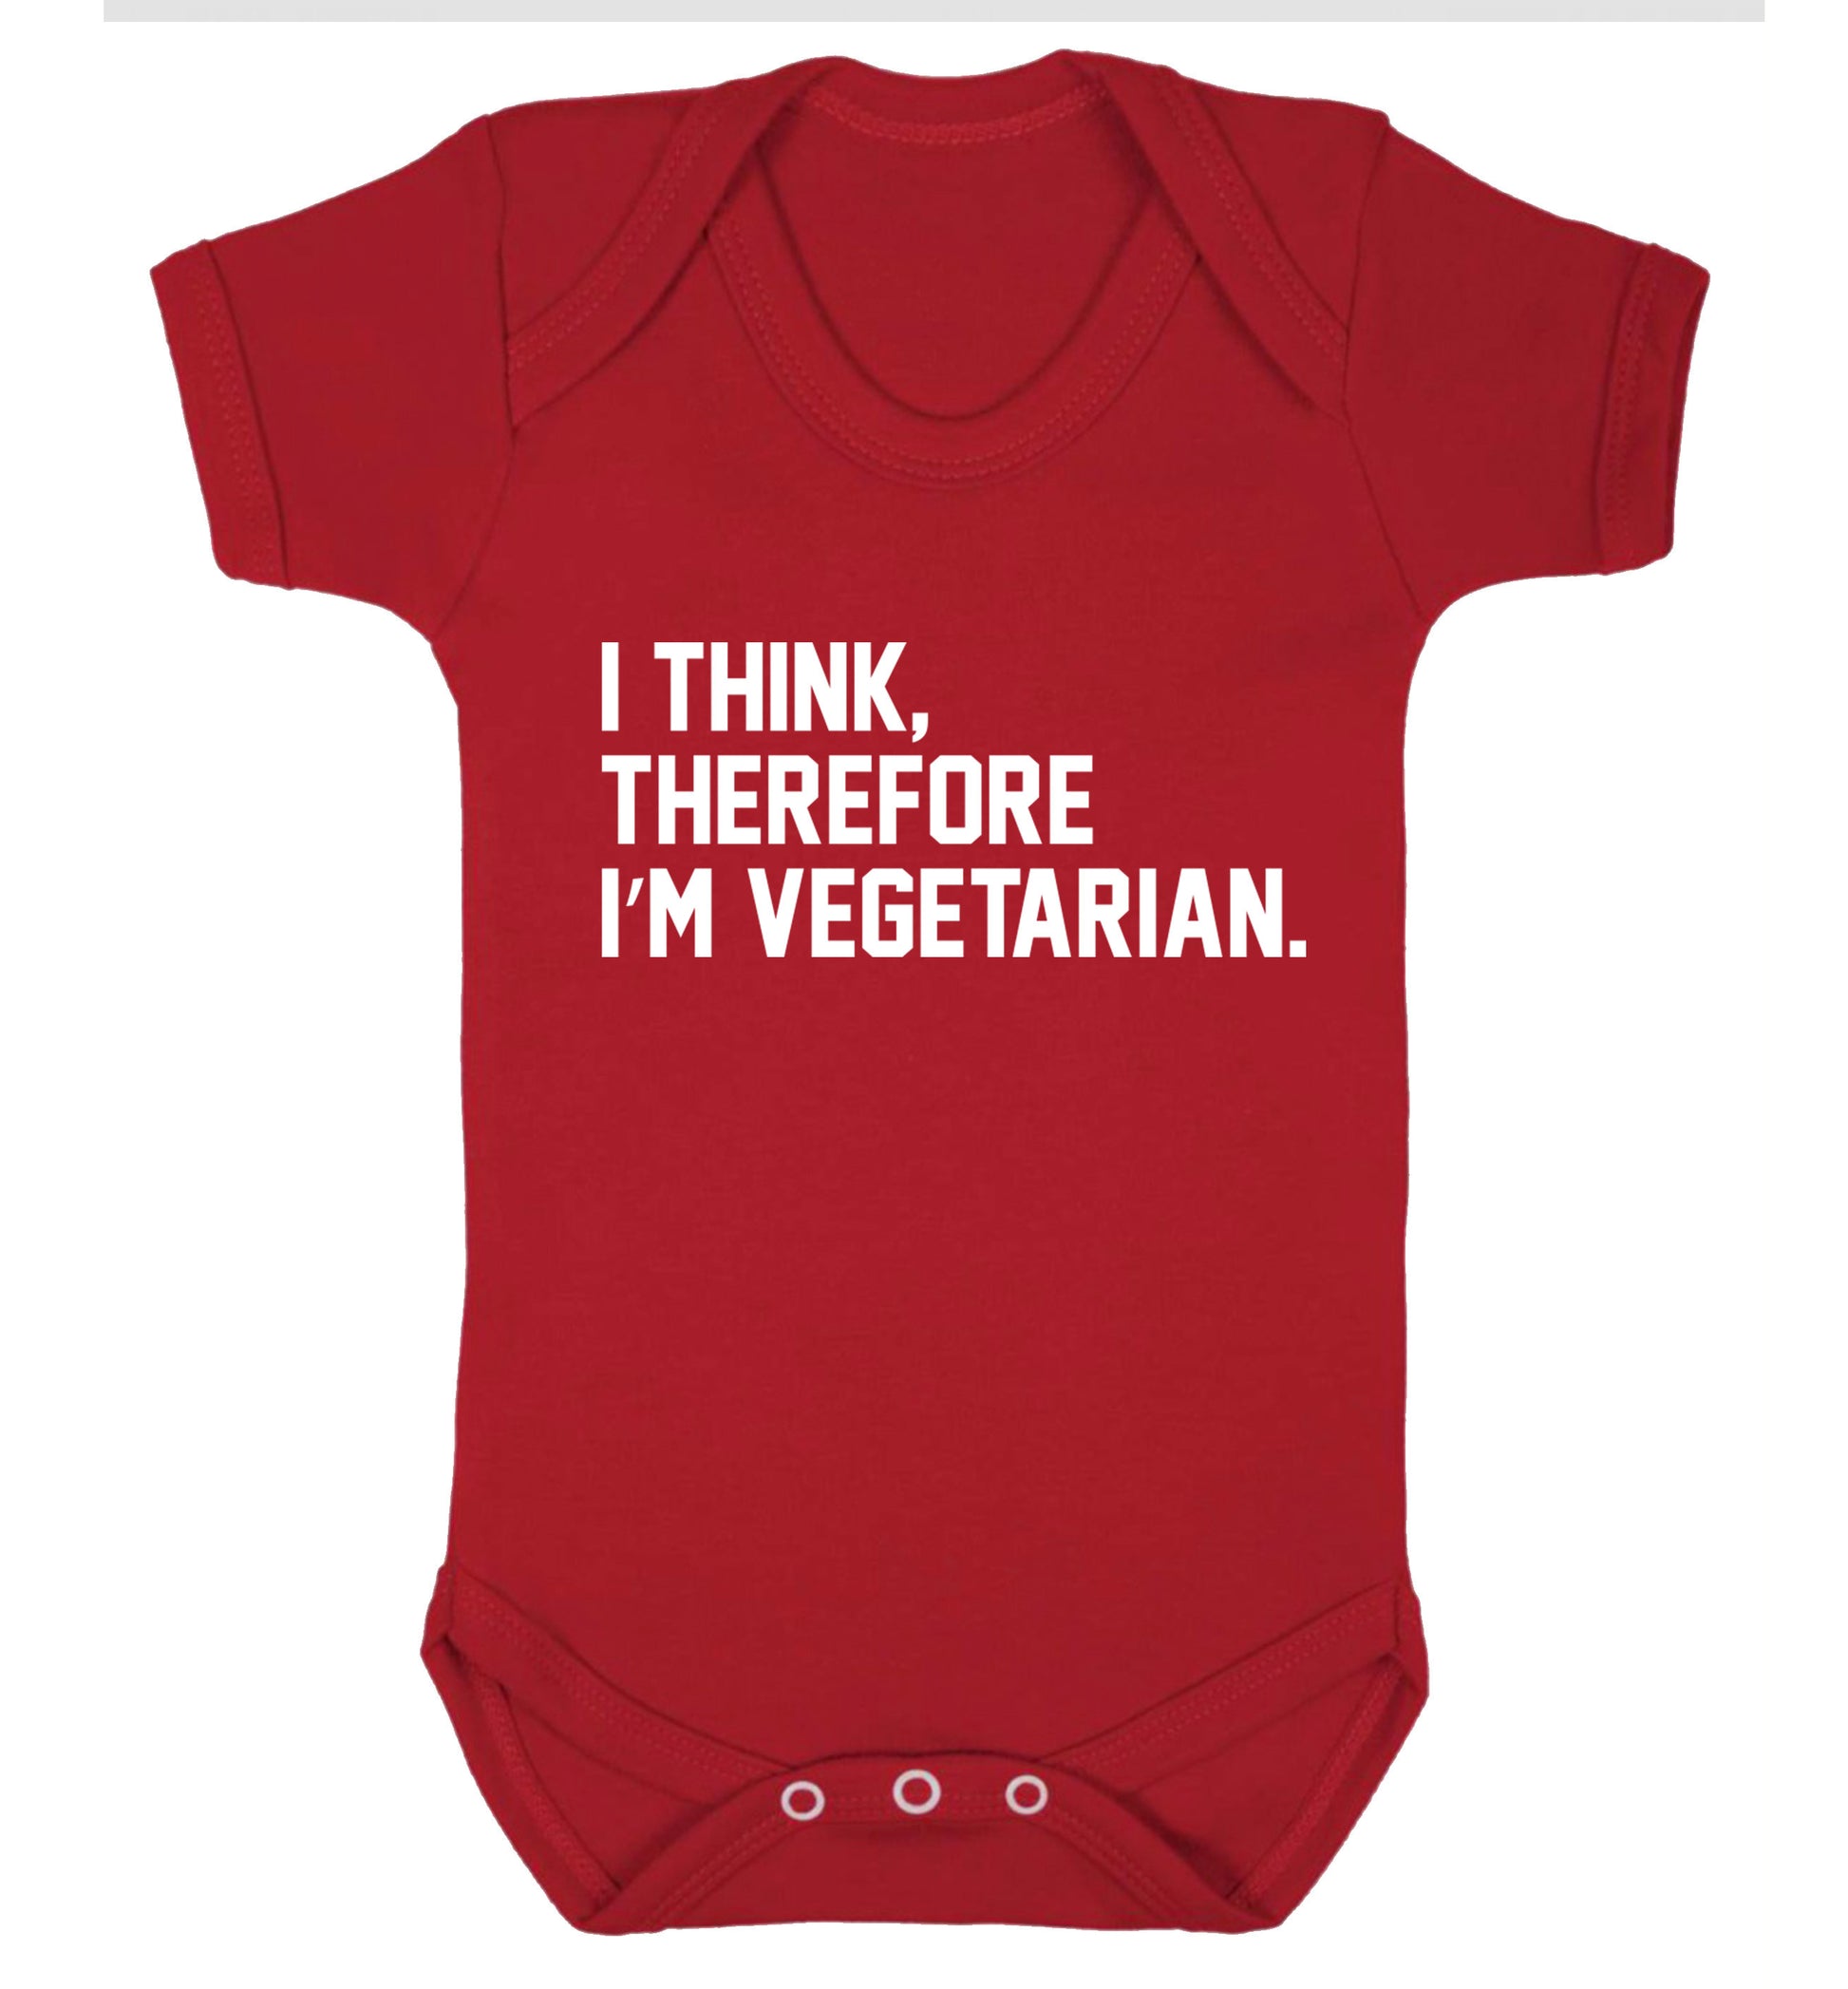 I think therefore I'm vegetarian Baby Vest red 18-24 months